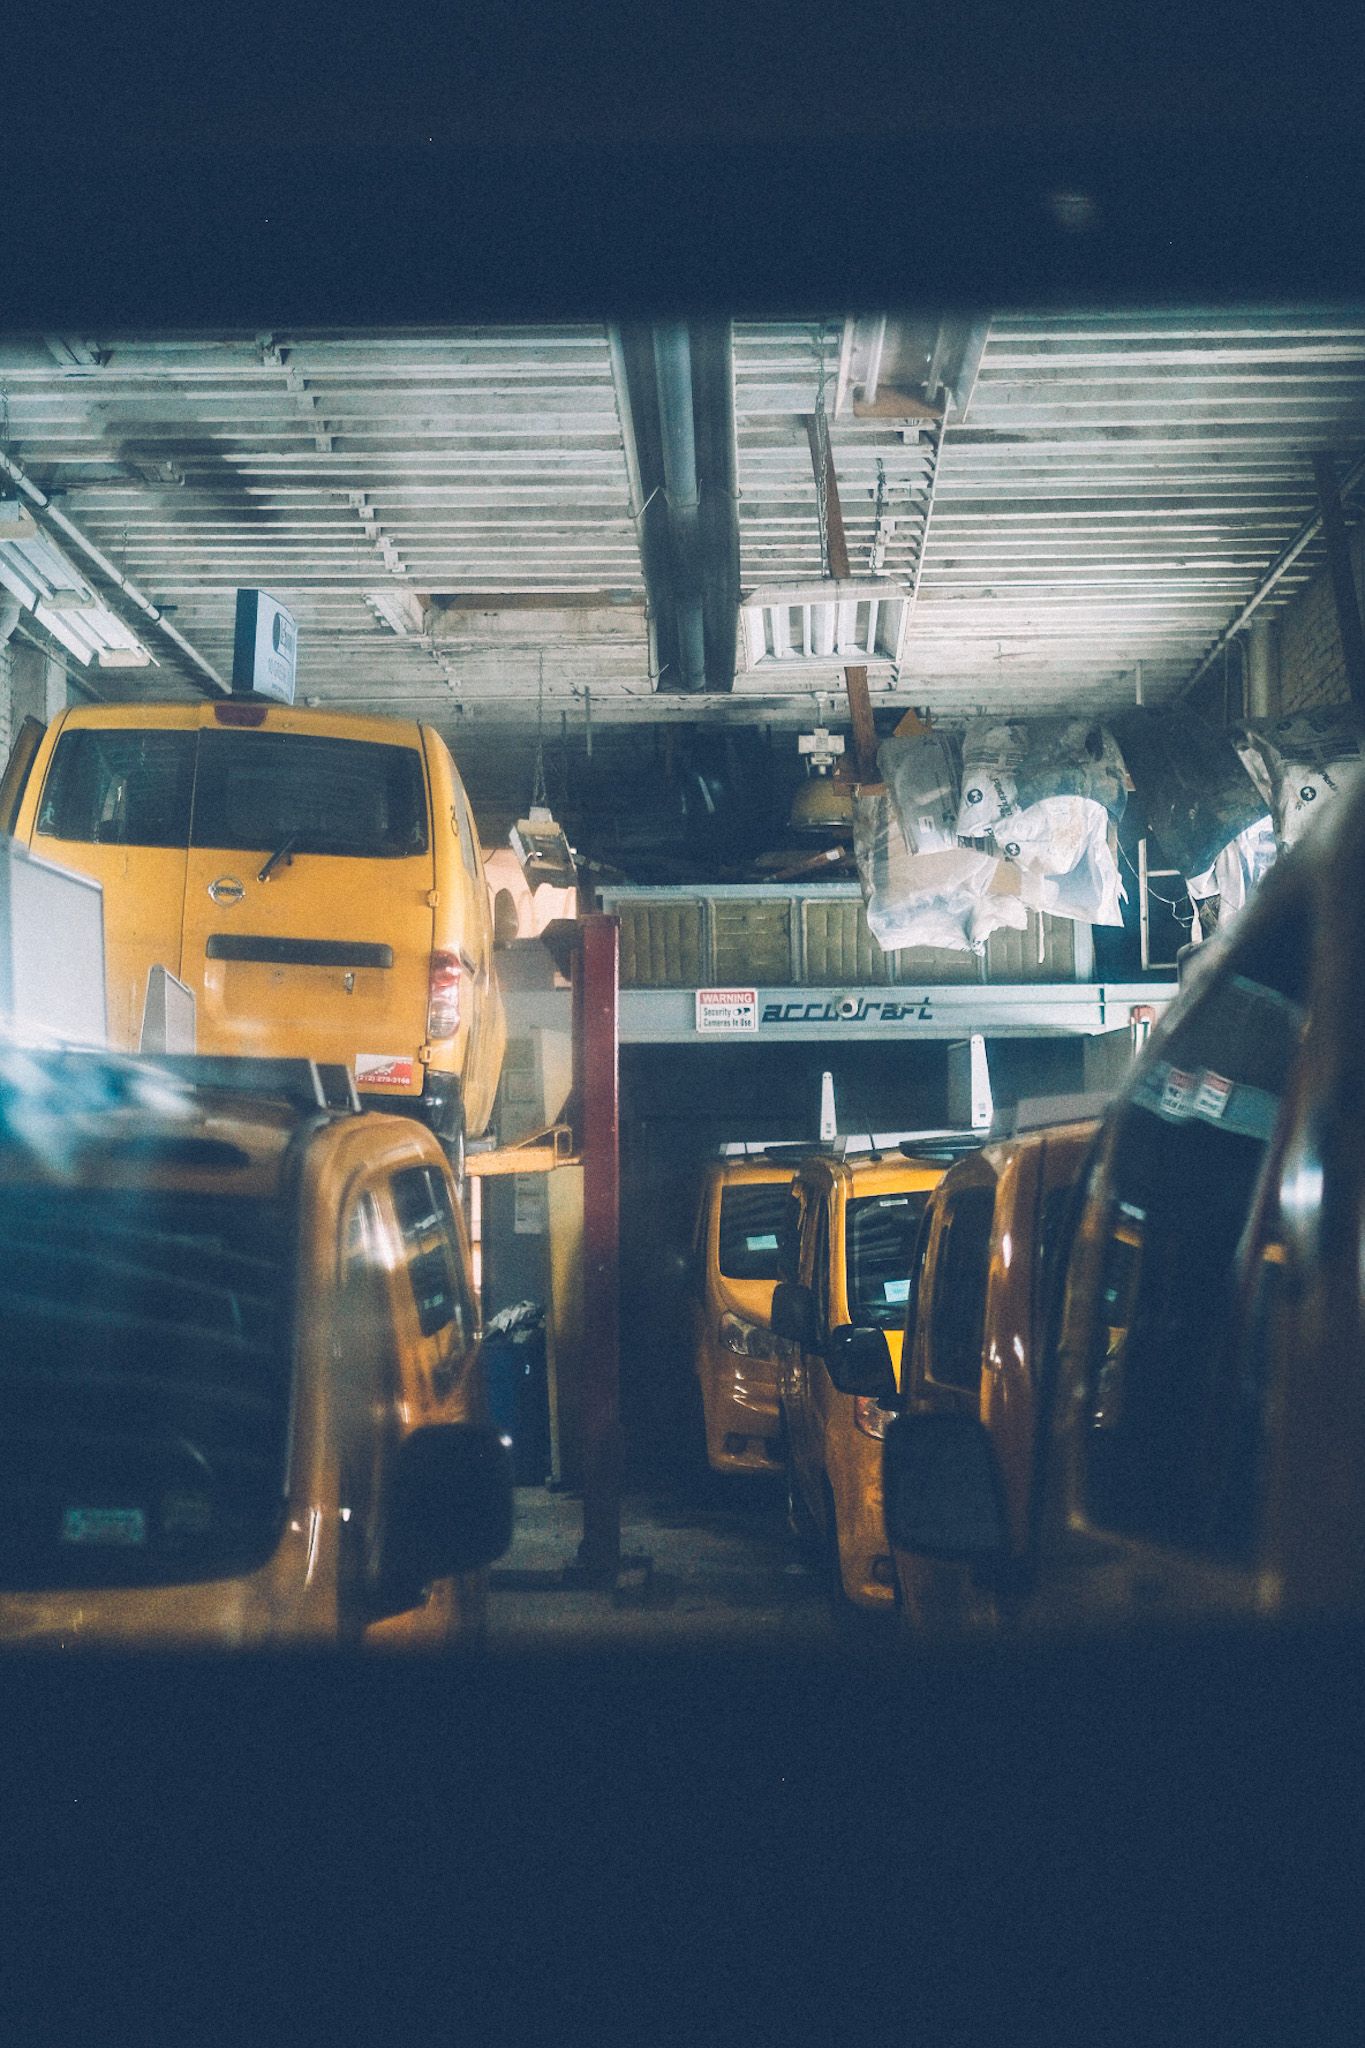 New York taxi cabs sit in a garage together, lit with fluorescent lamps.